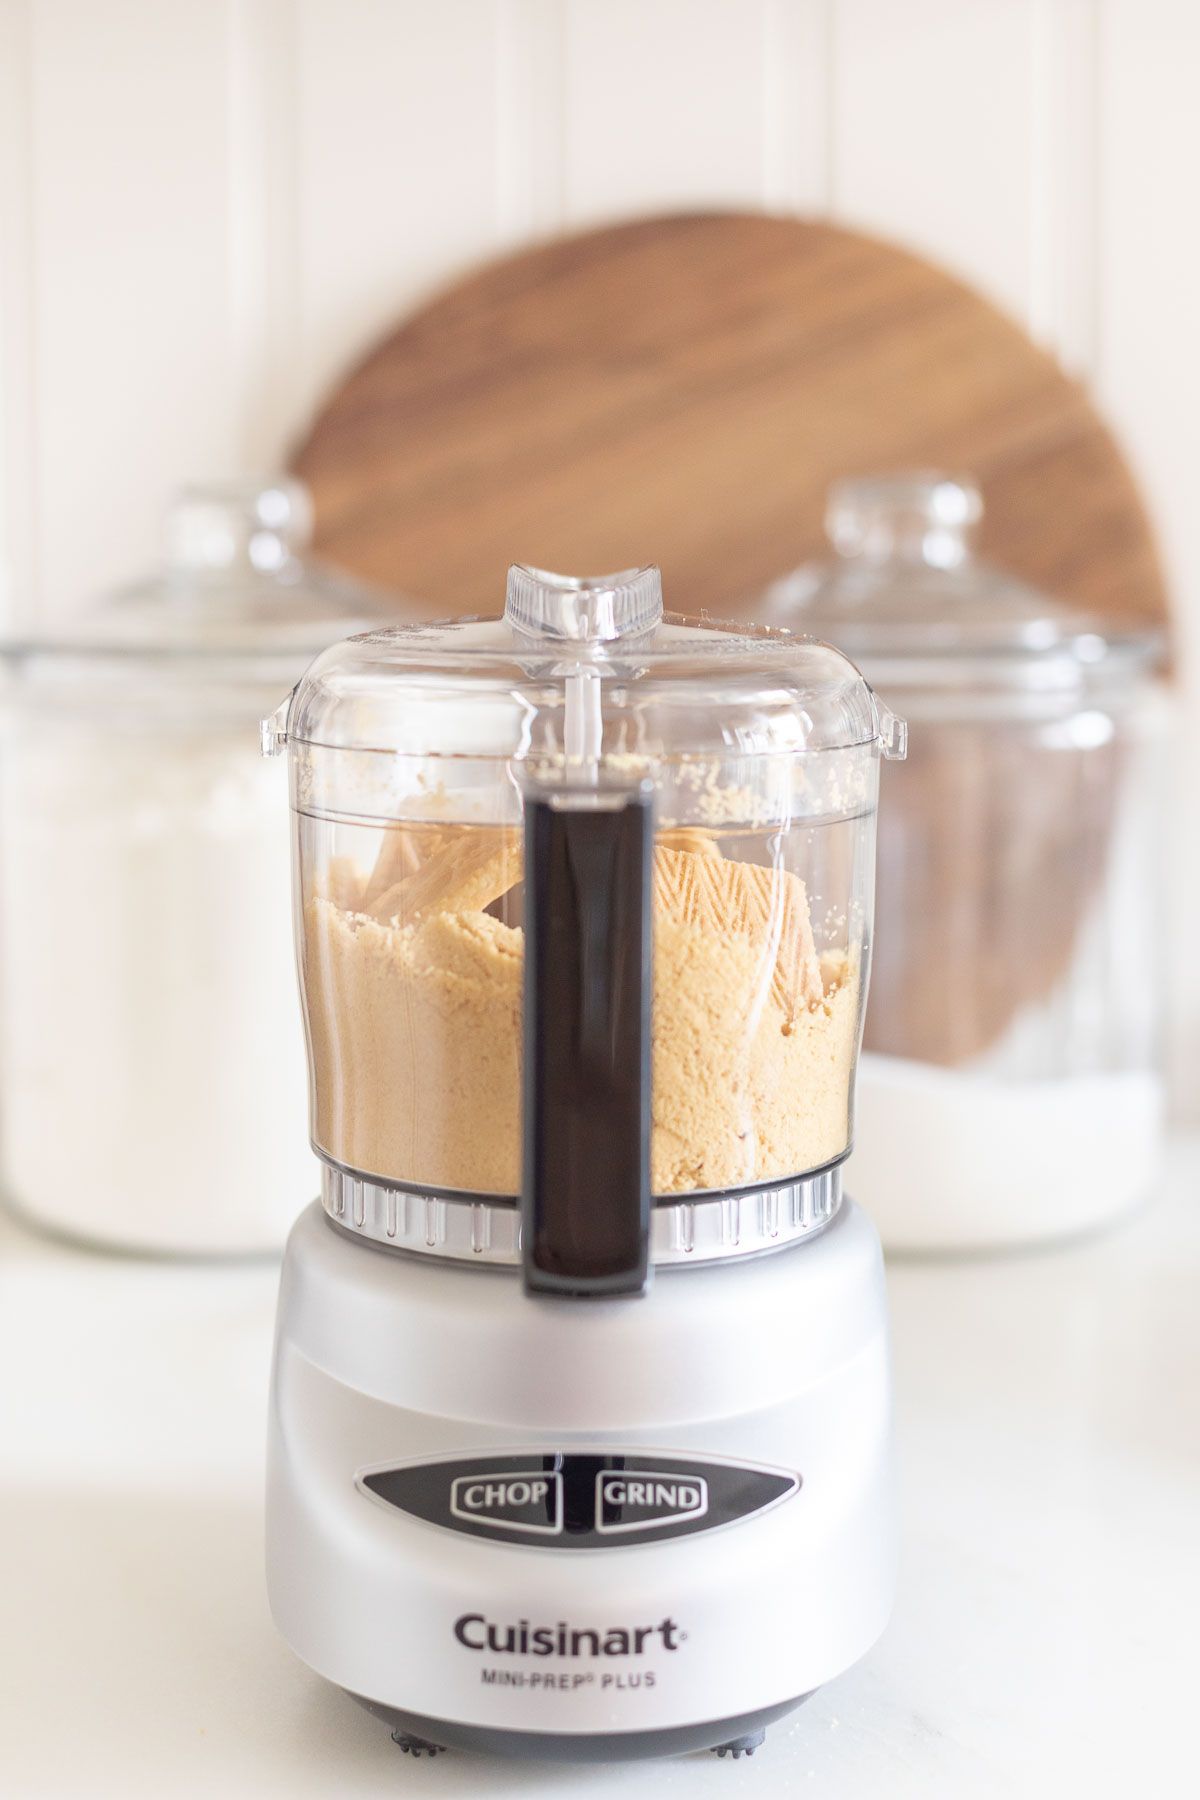 A small food processor filled with ingredients for shortbread crusts